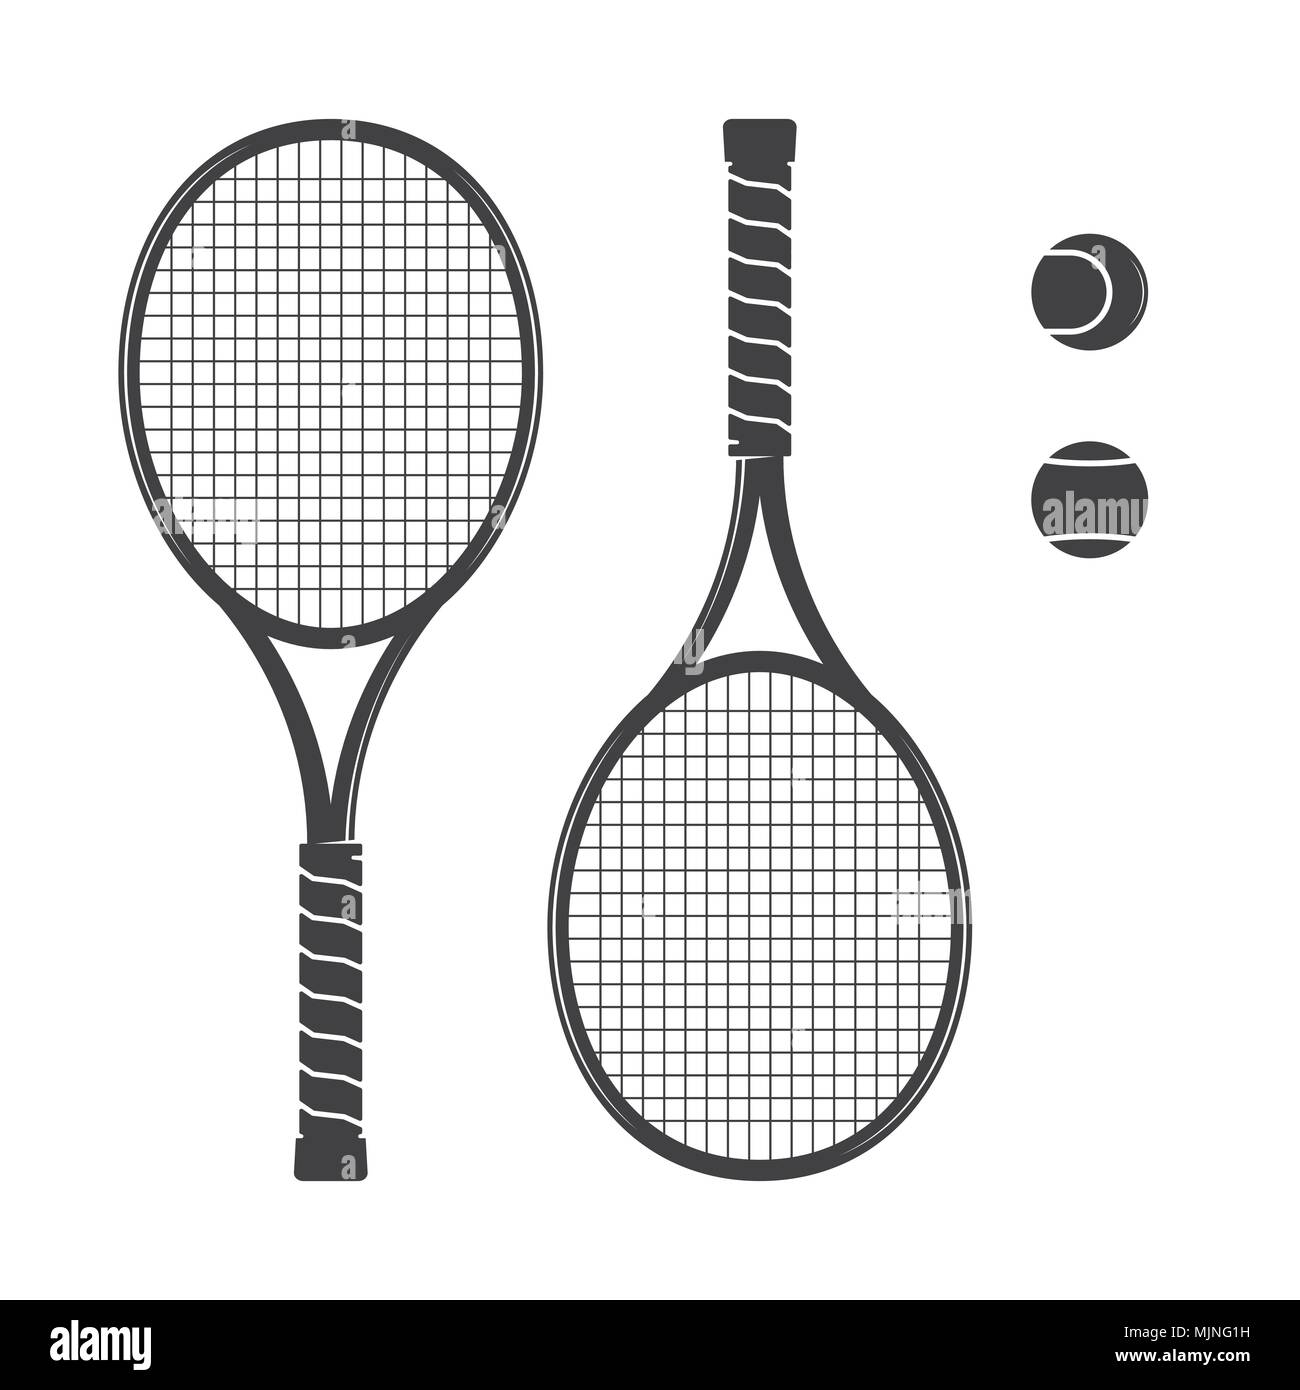 Set of tennis rackets and tennis balls. Vector illustration. Racquets silhouette on the white background. Stock Vector